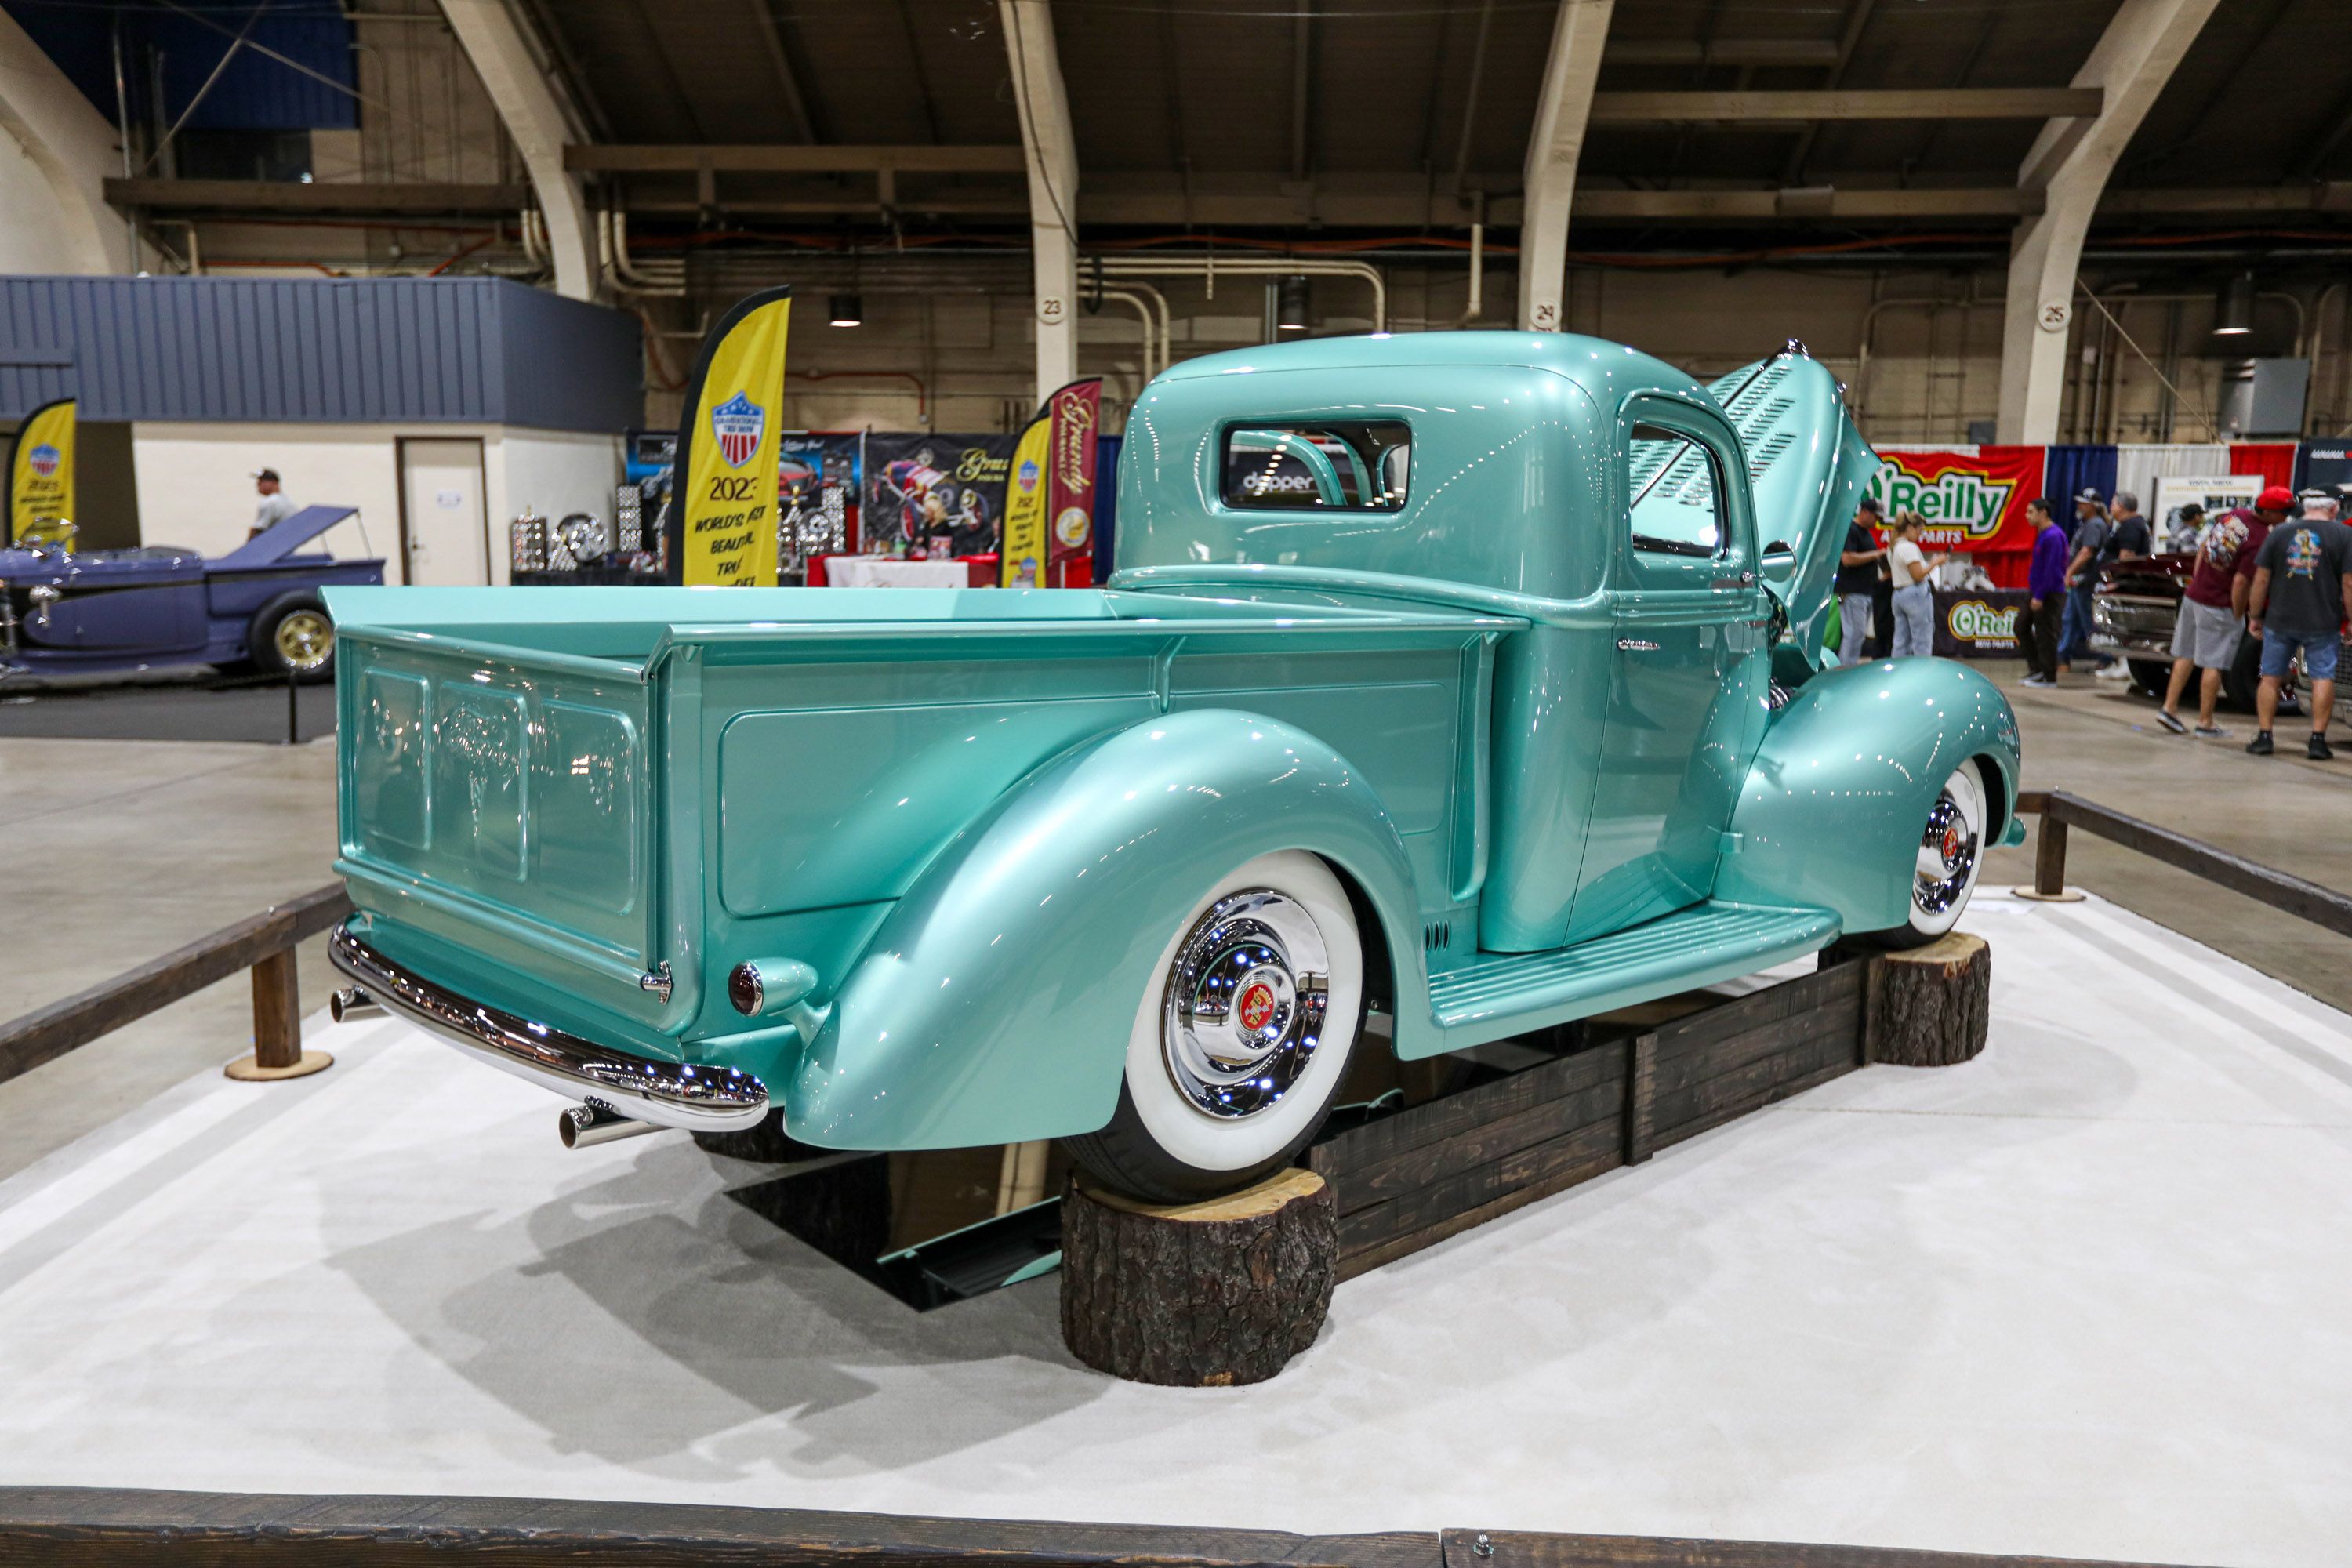 Stunningly Putting in Lovely Blue: The 1940 Ford Claims Title of World’s Most Beautiful Truck